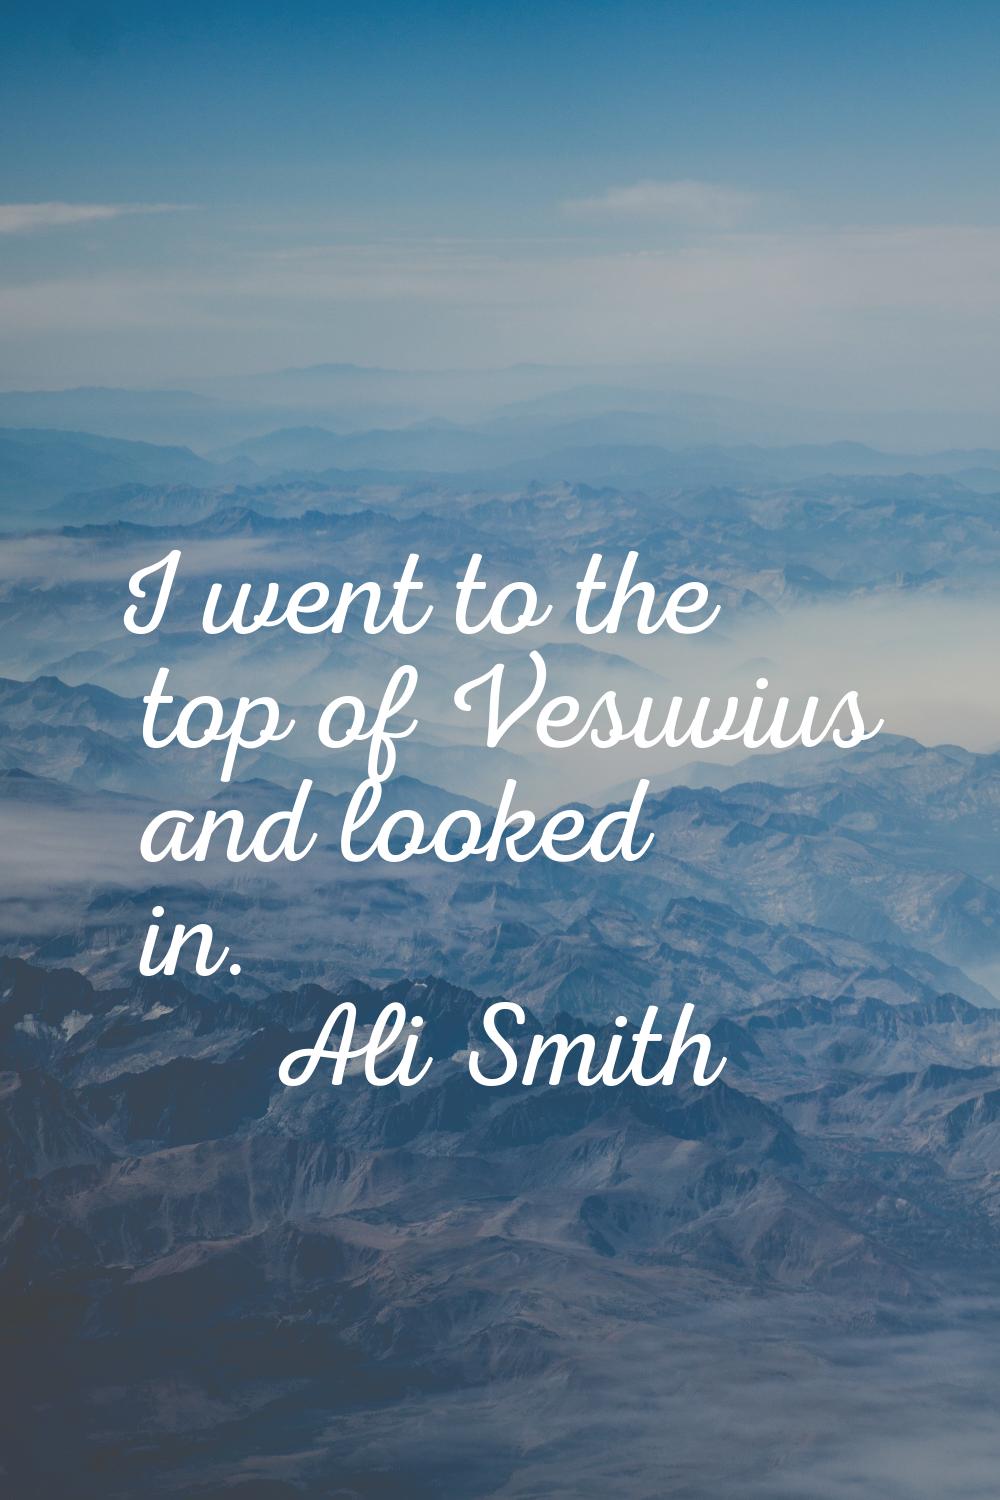 I went to the top of Vesuvius and looked in.